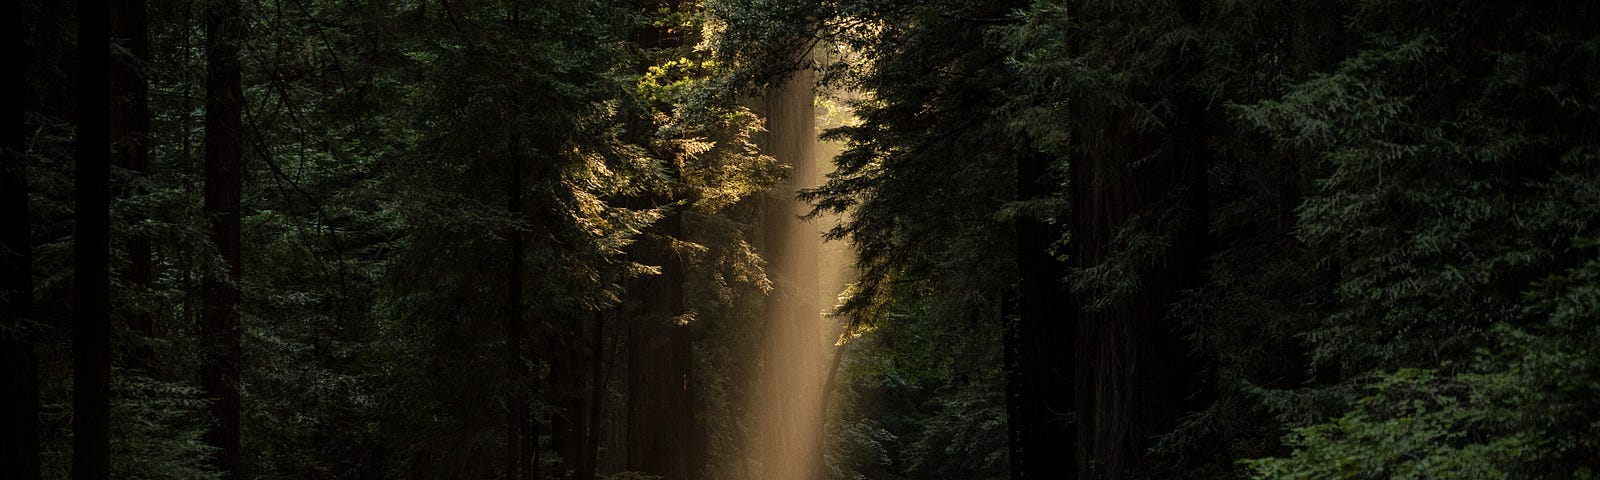 A road in a forest with a single beam of sunlight breaking through the trees